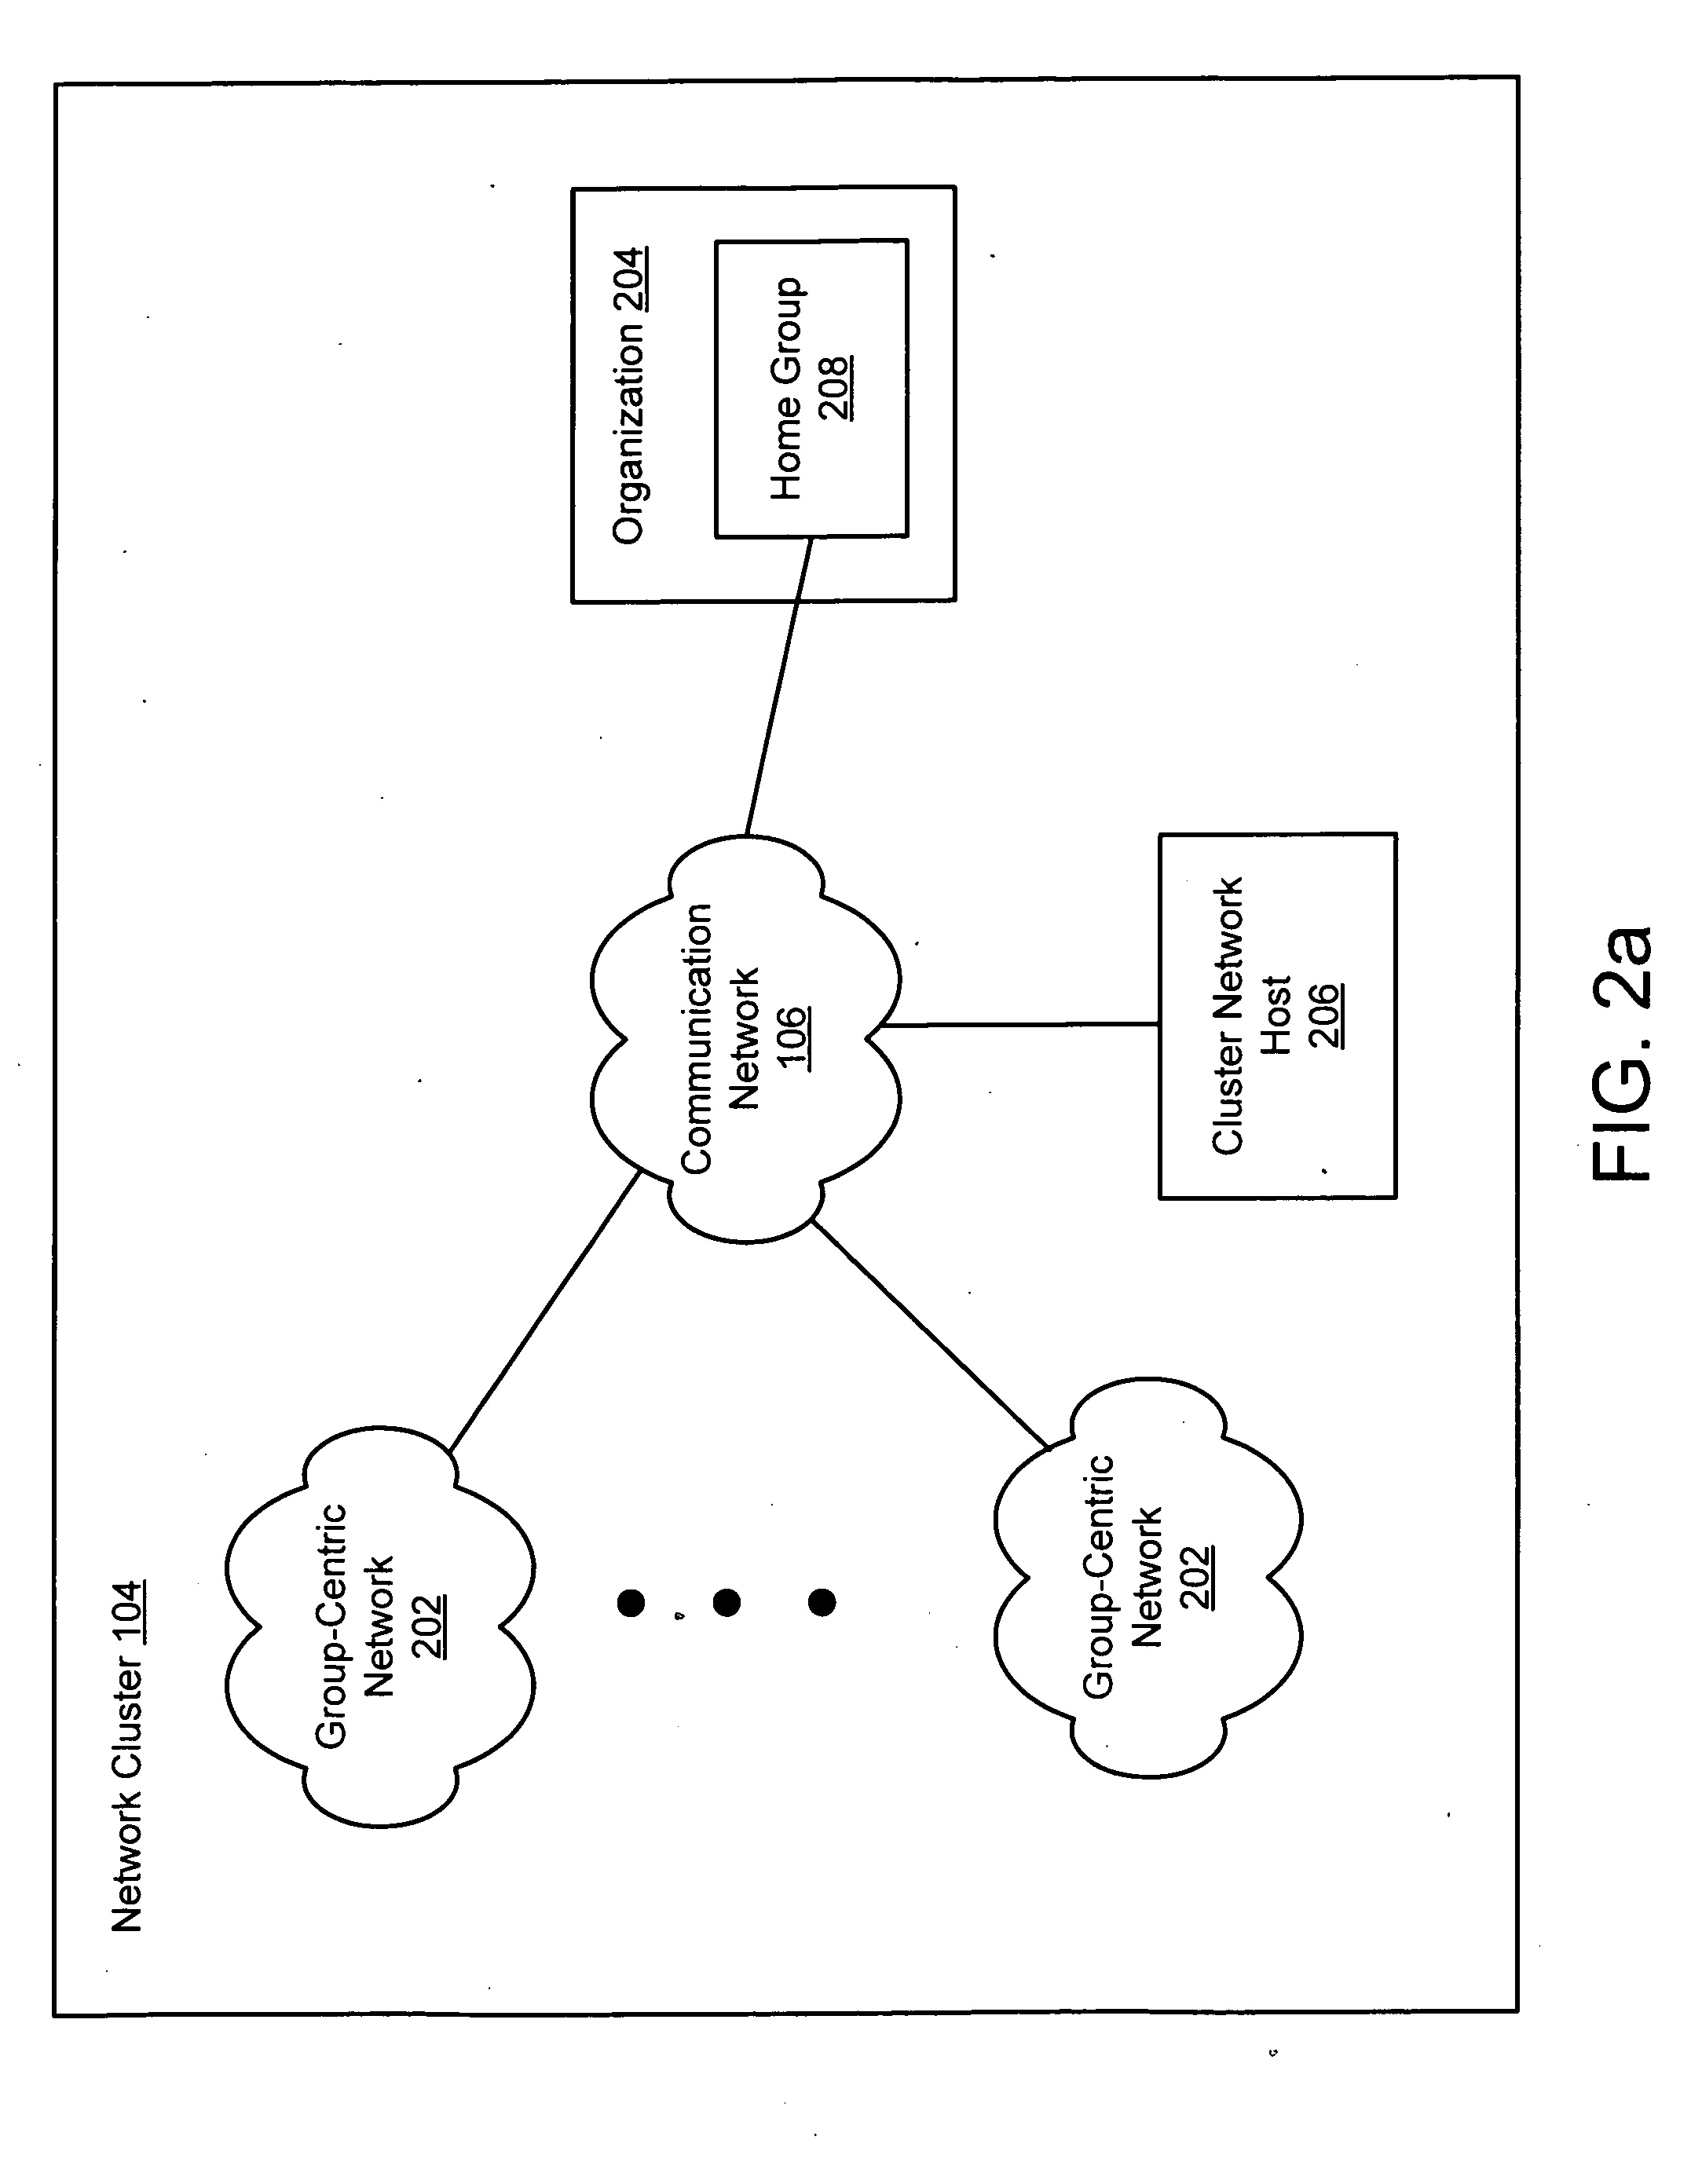 System and method for providing universal profiles for networked clusters